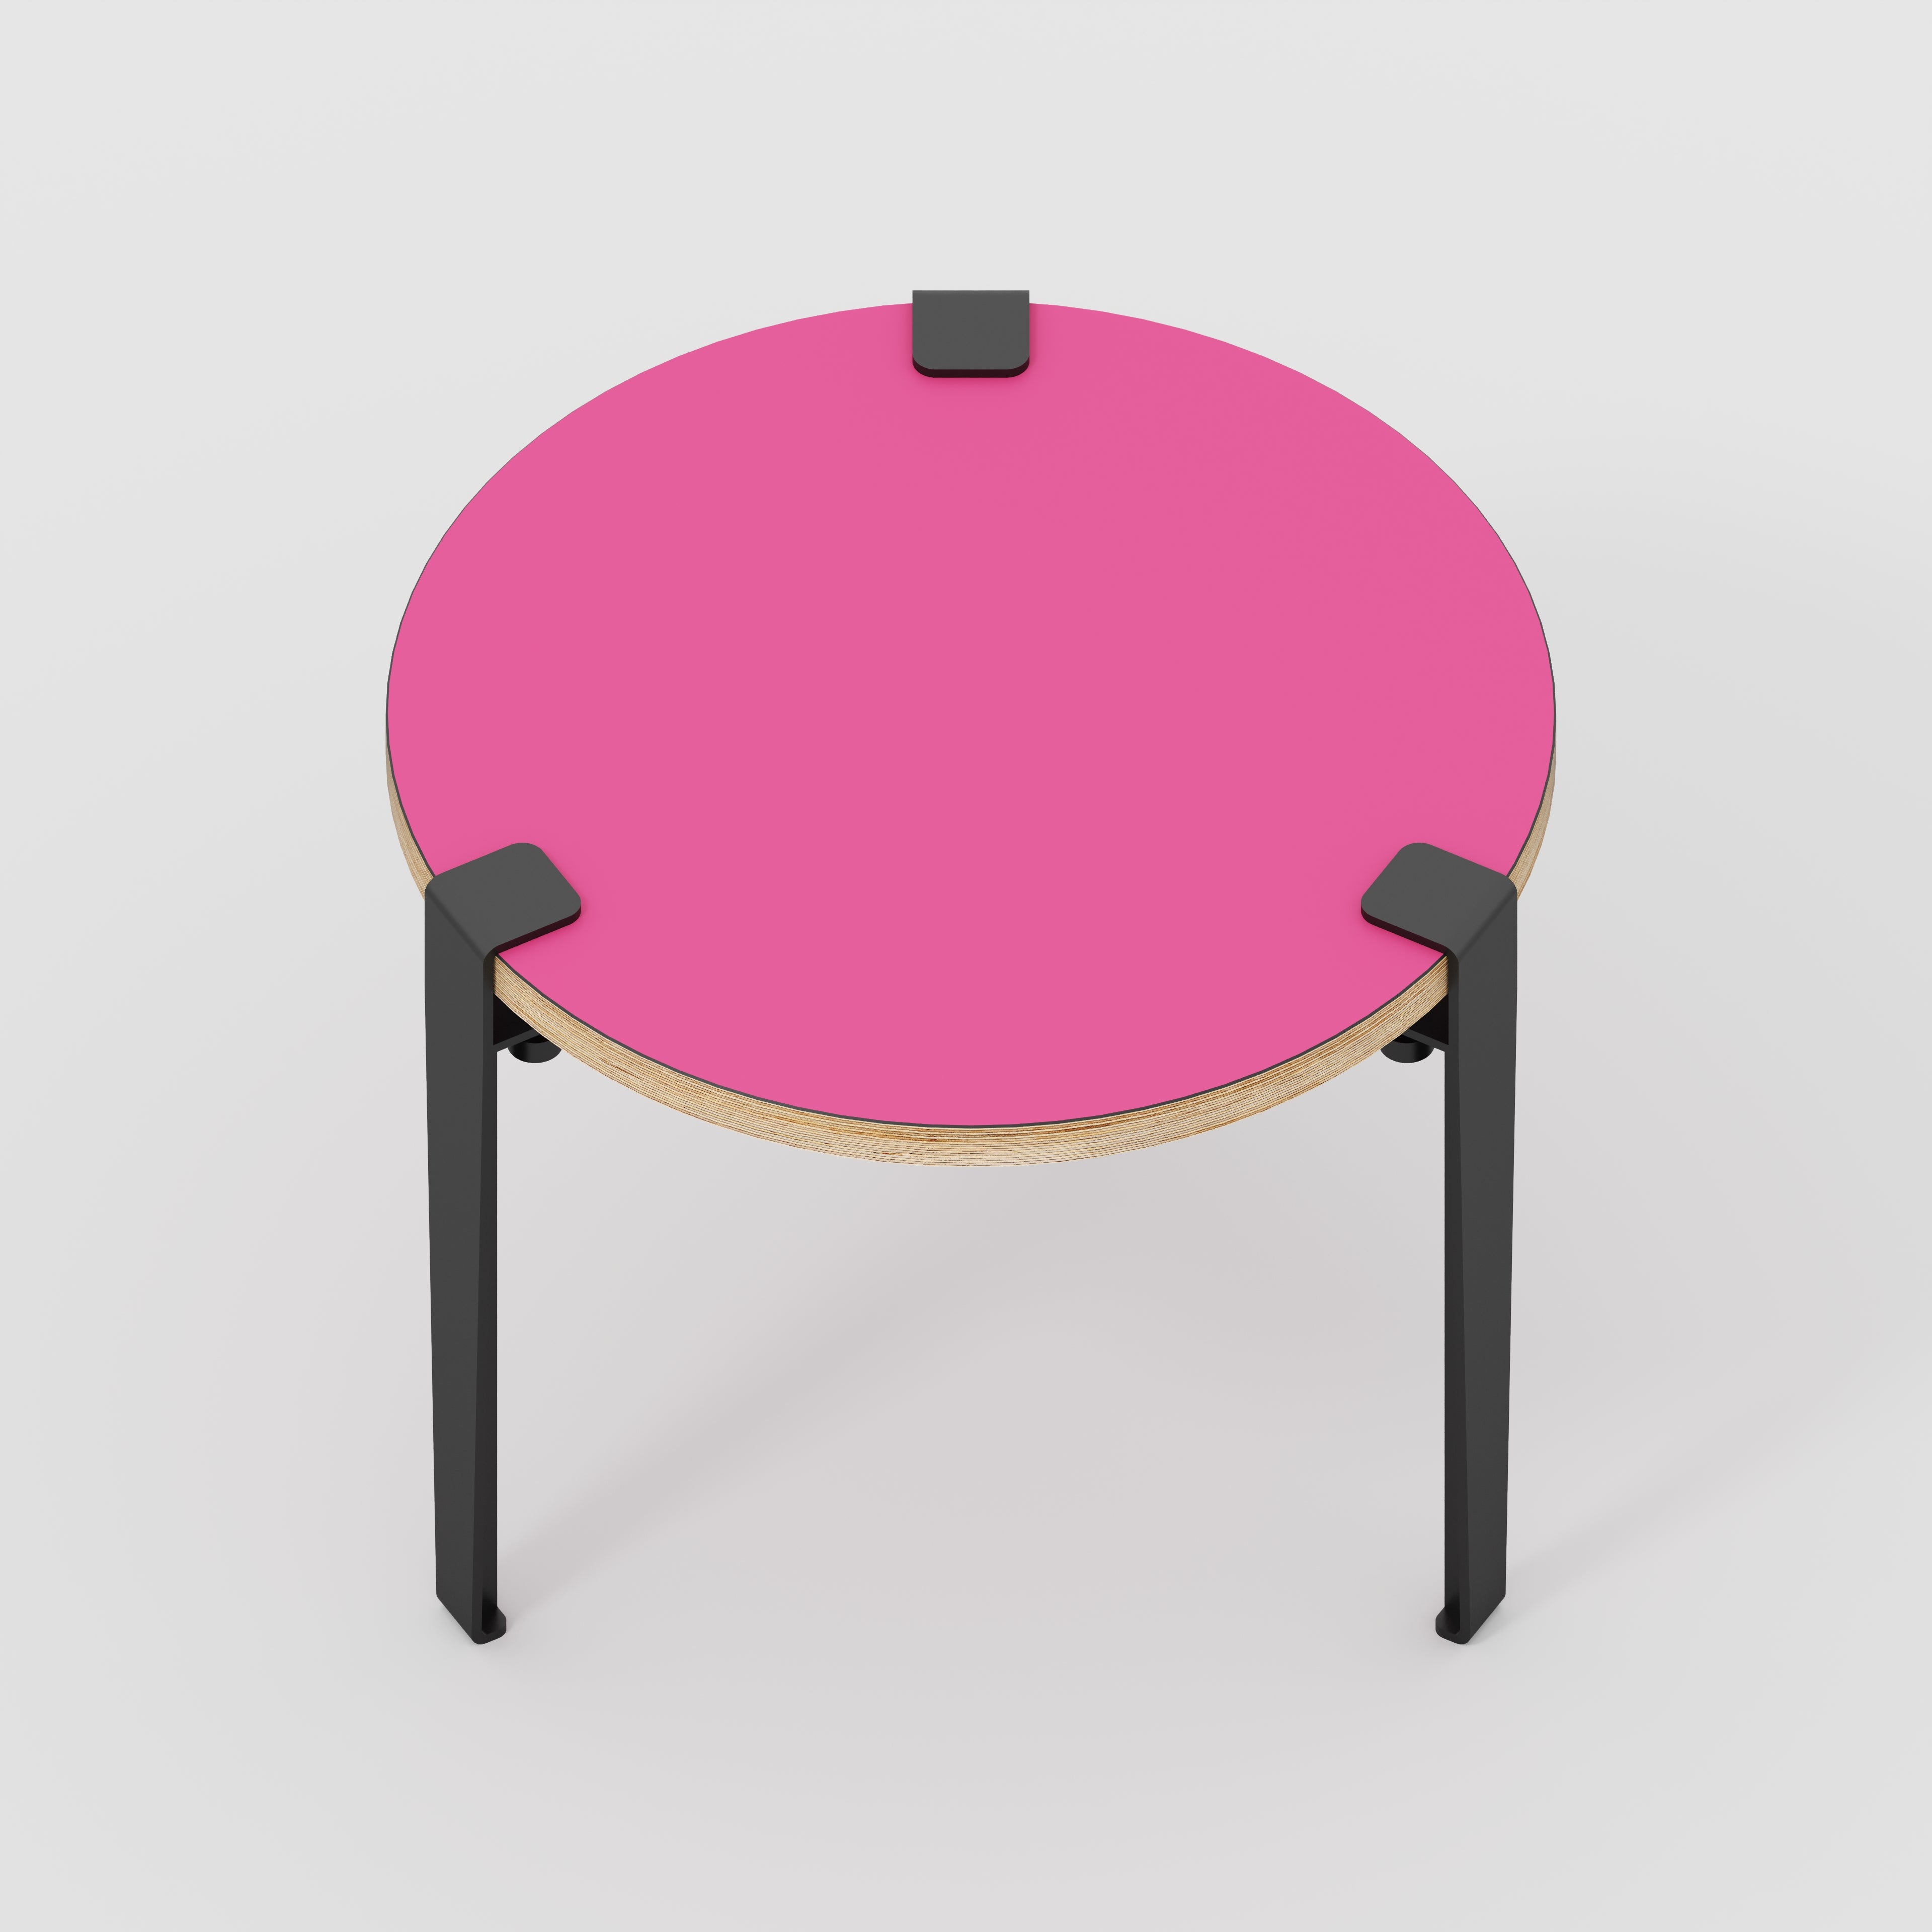 Round Side Table with Black Tiptoe Legs - Formica Juicy Pink - 500(dia) x 430(h)